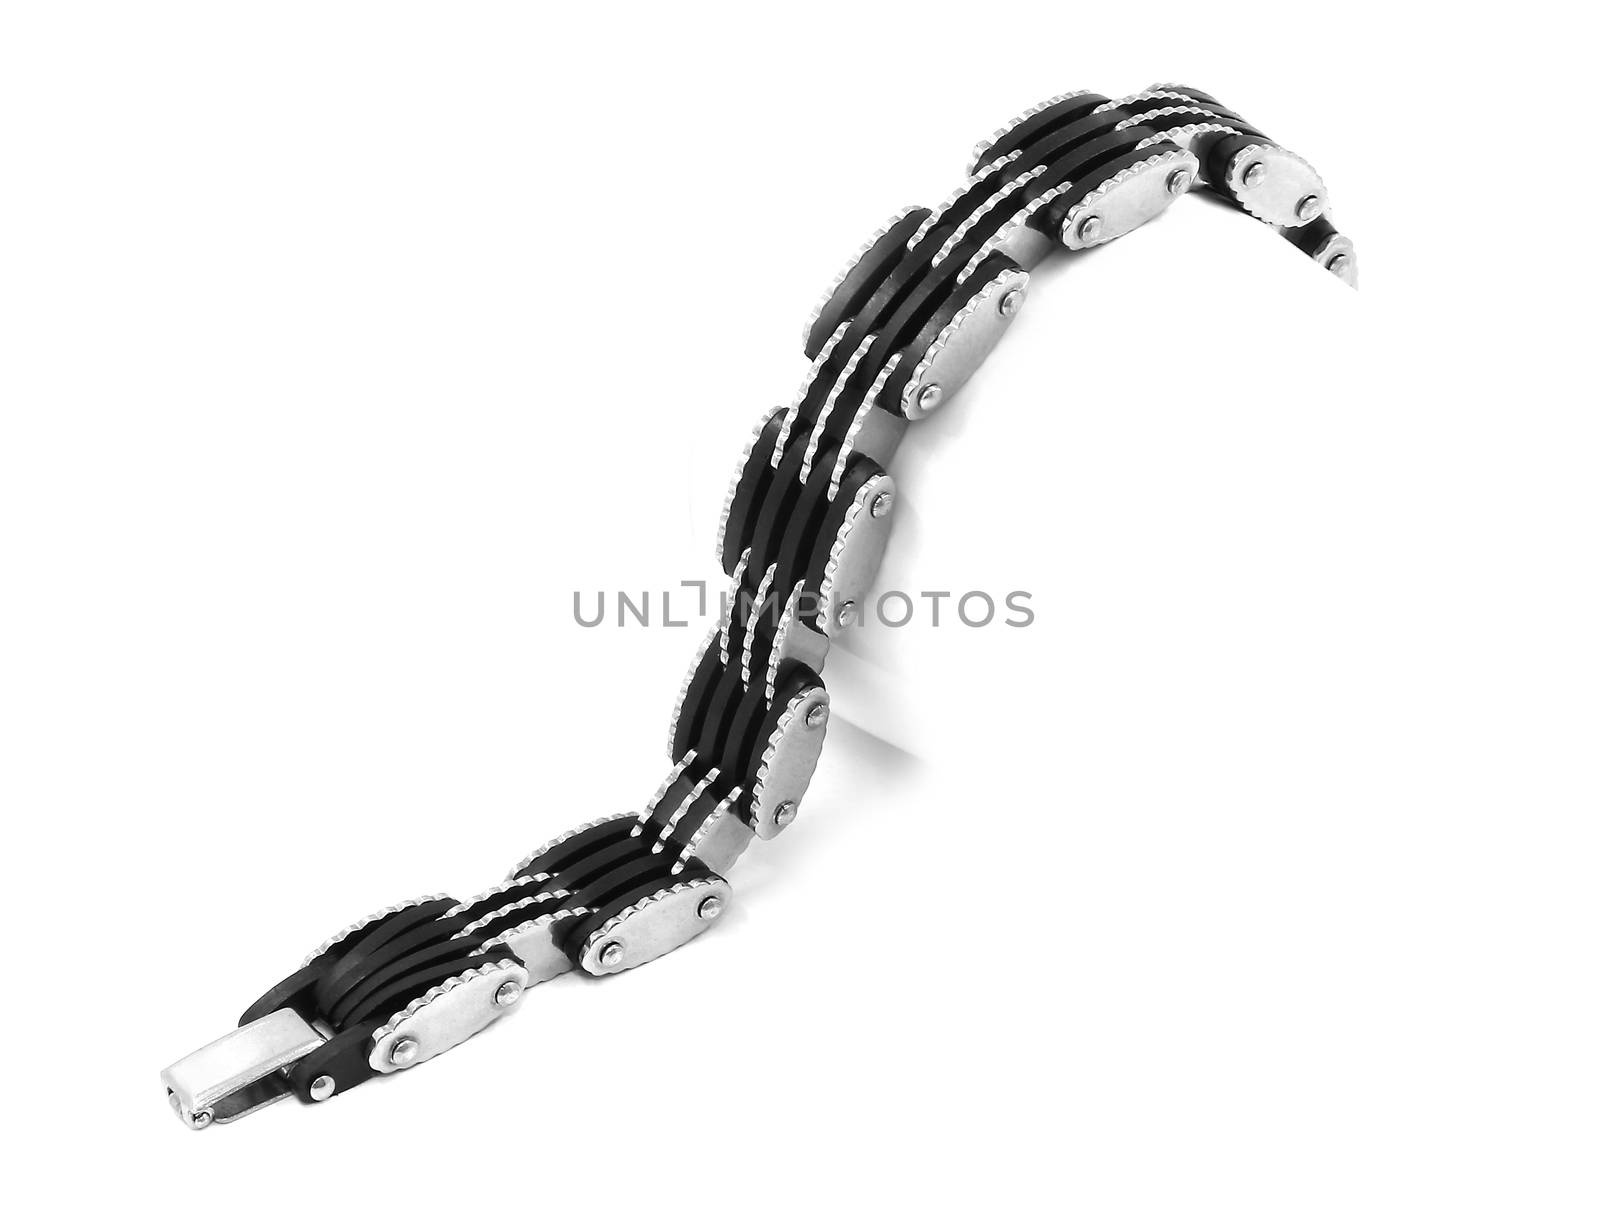 Men's Bracelet stainless steel and rubber on a white background